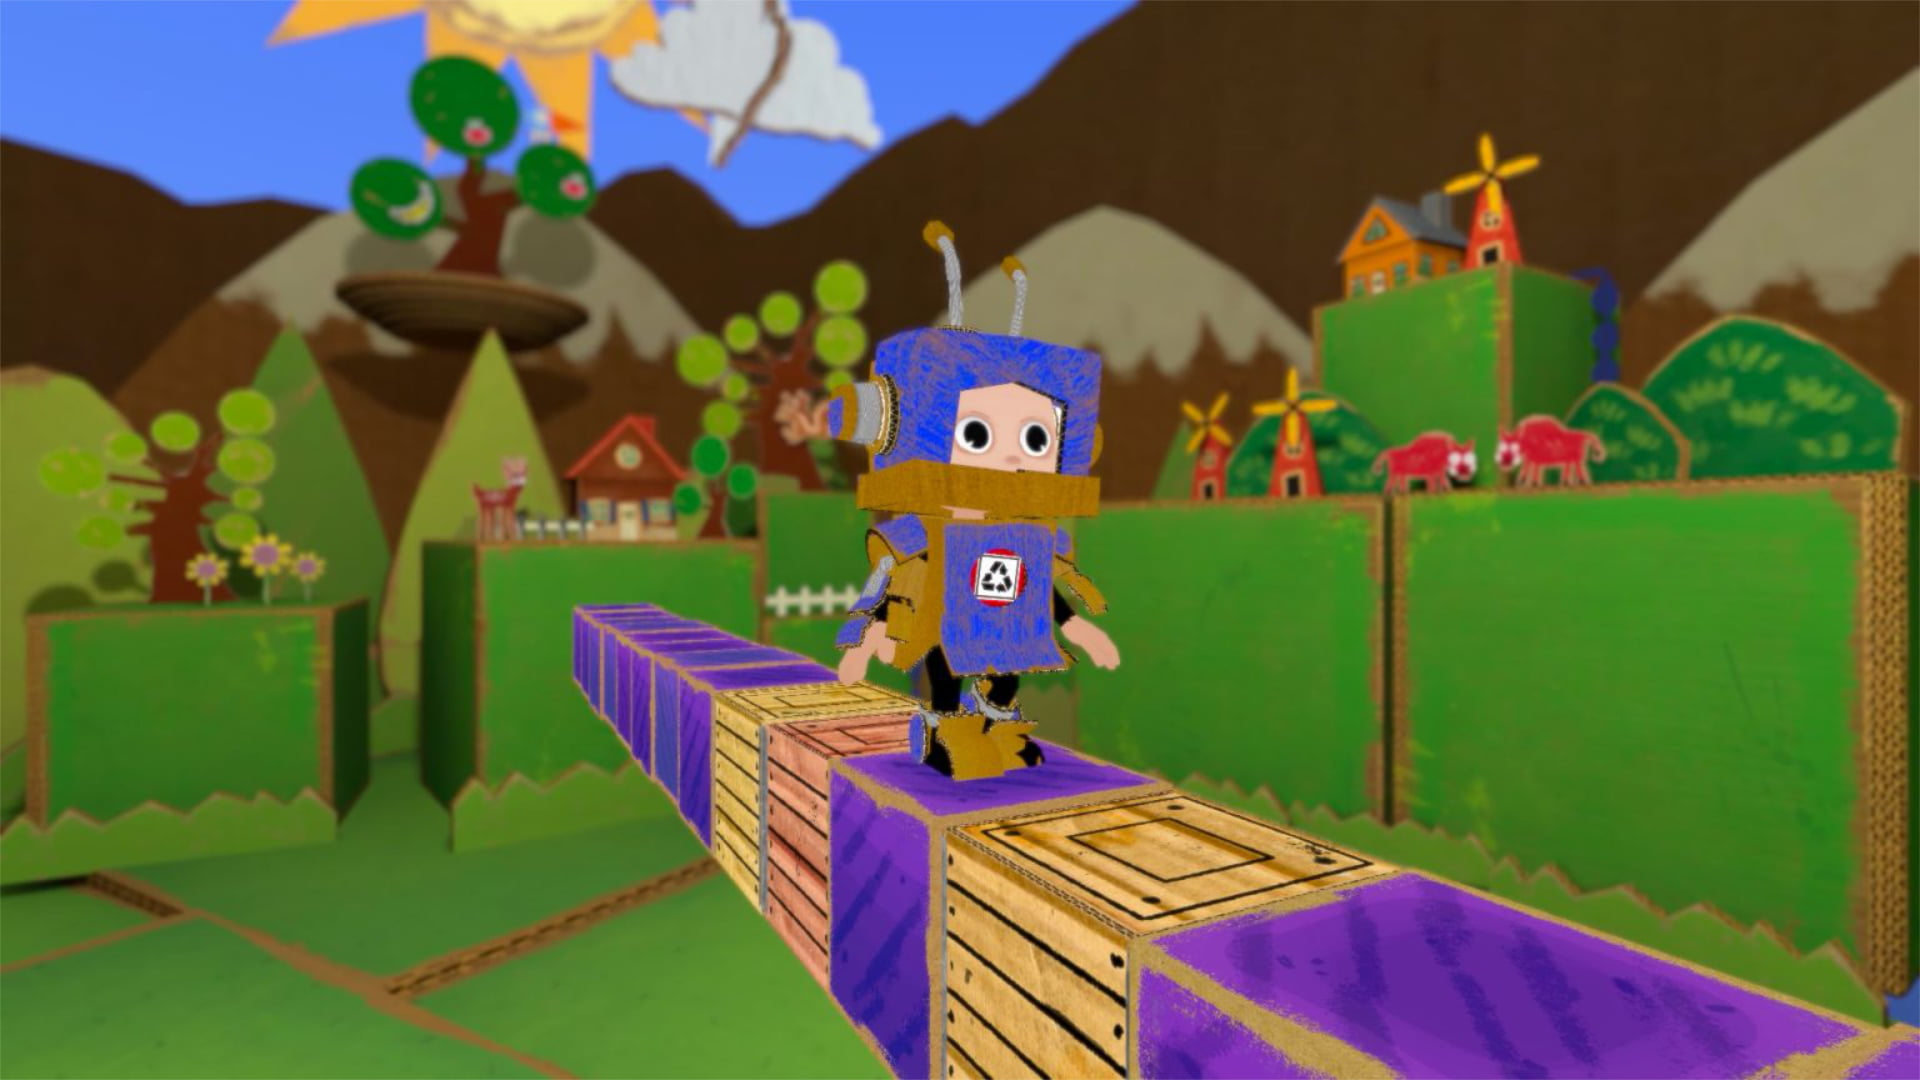 PathCraft is a cuddly VR game in the style of Lemmings